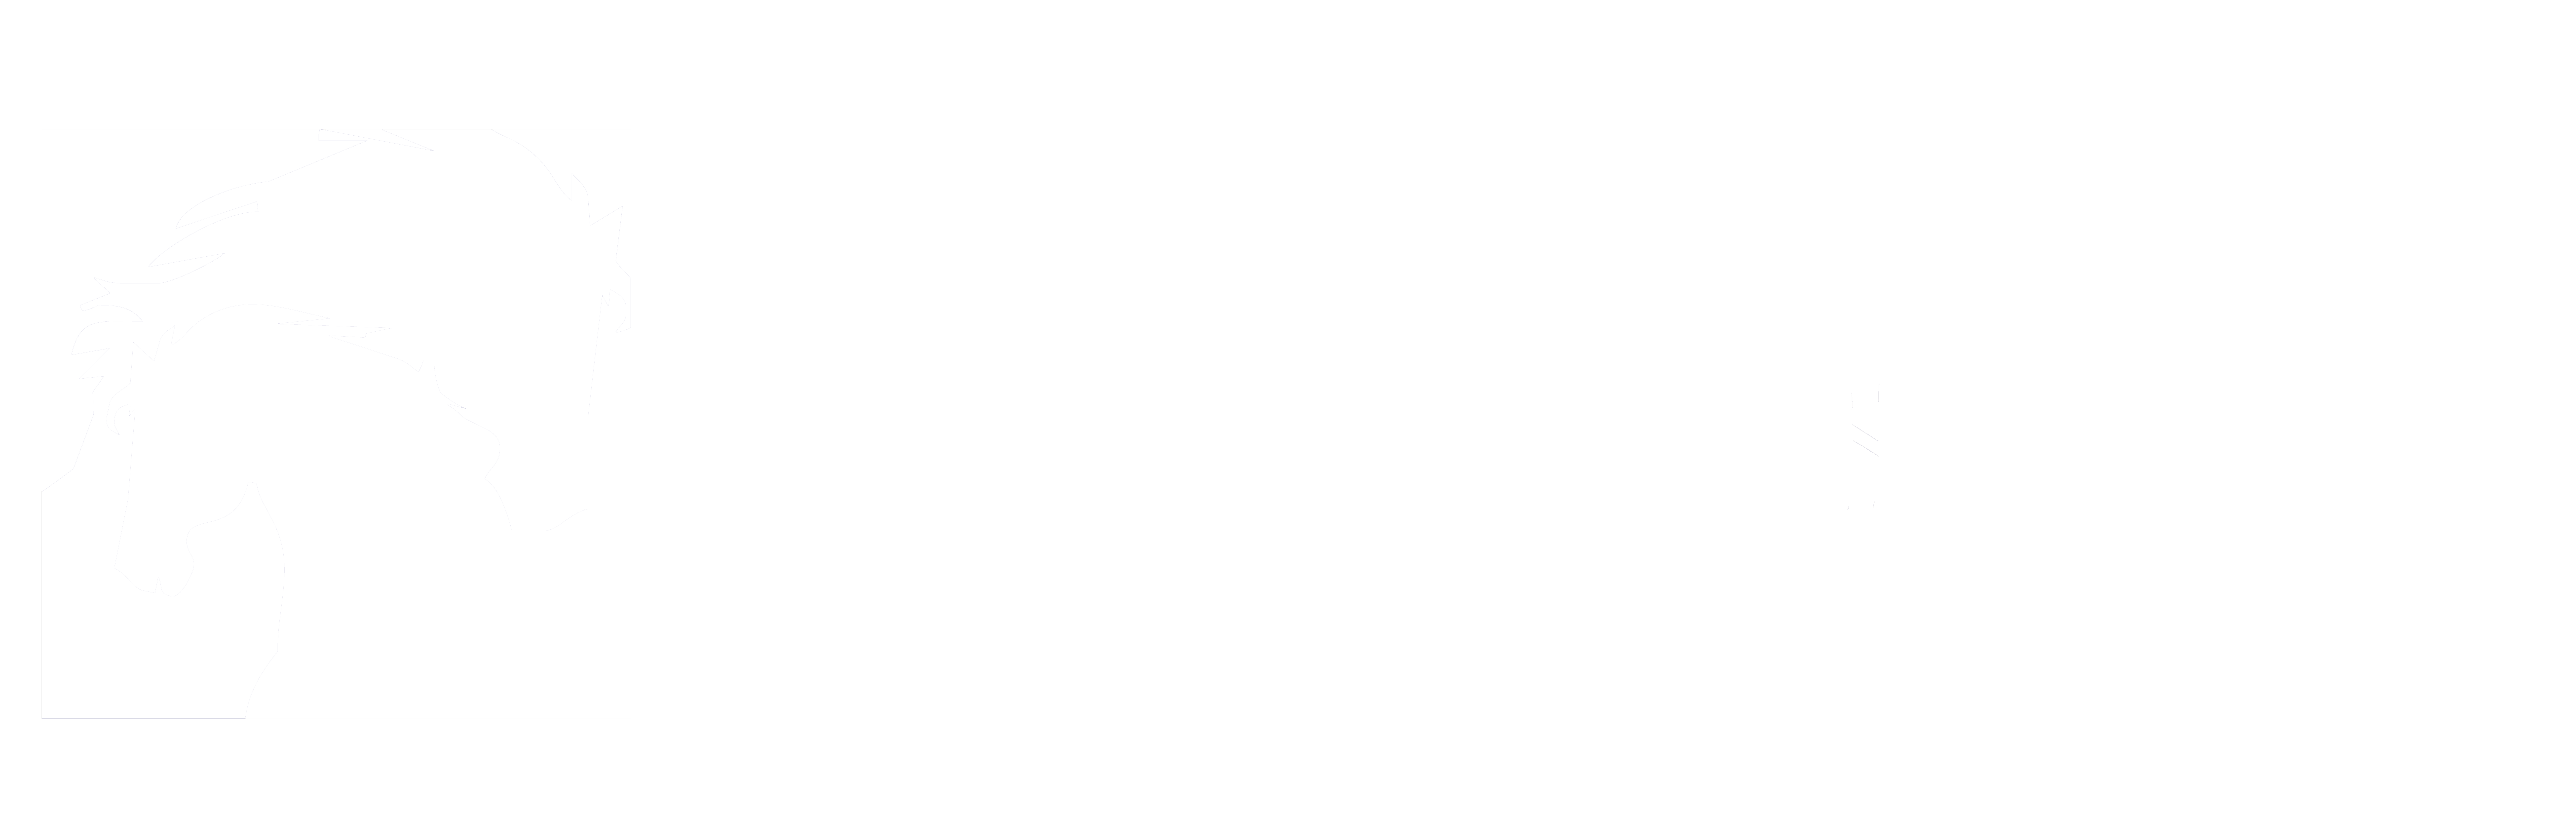 Mare and Foal Logo - Home - The Mare & Foal Sanctuary